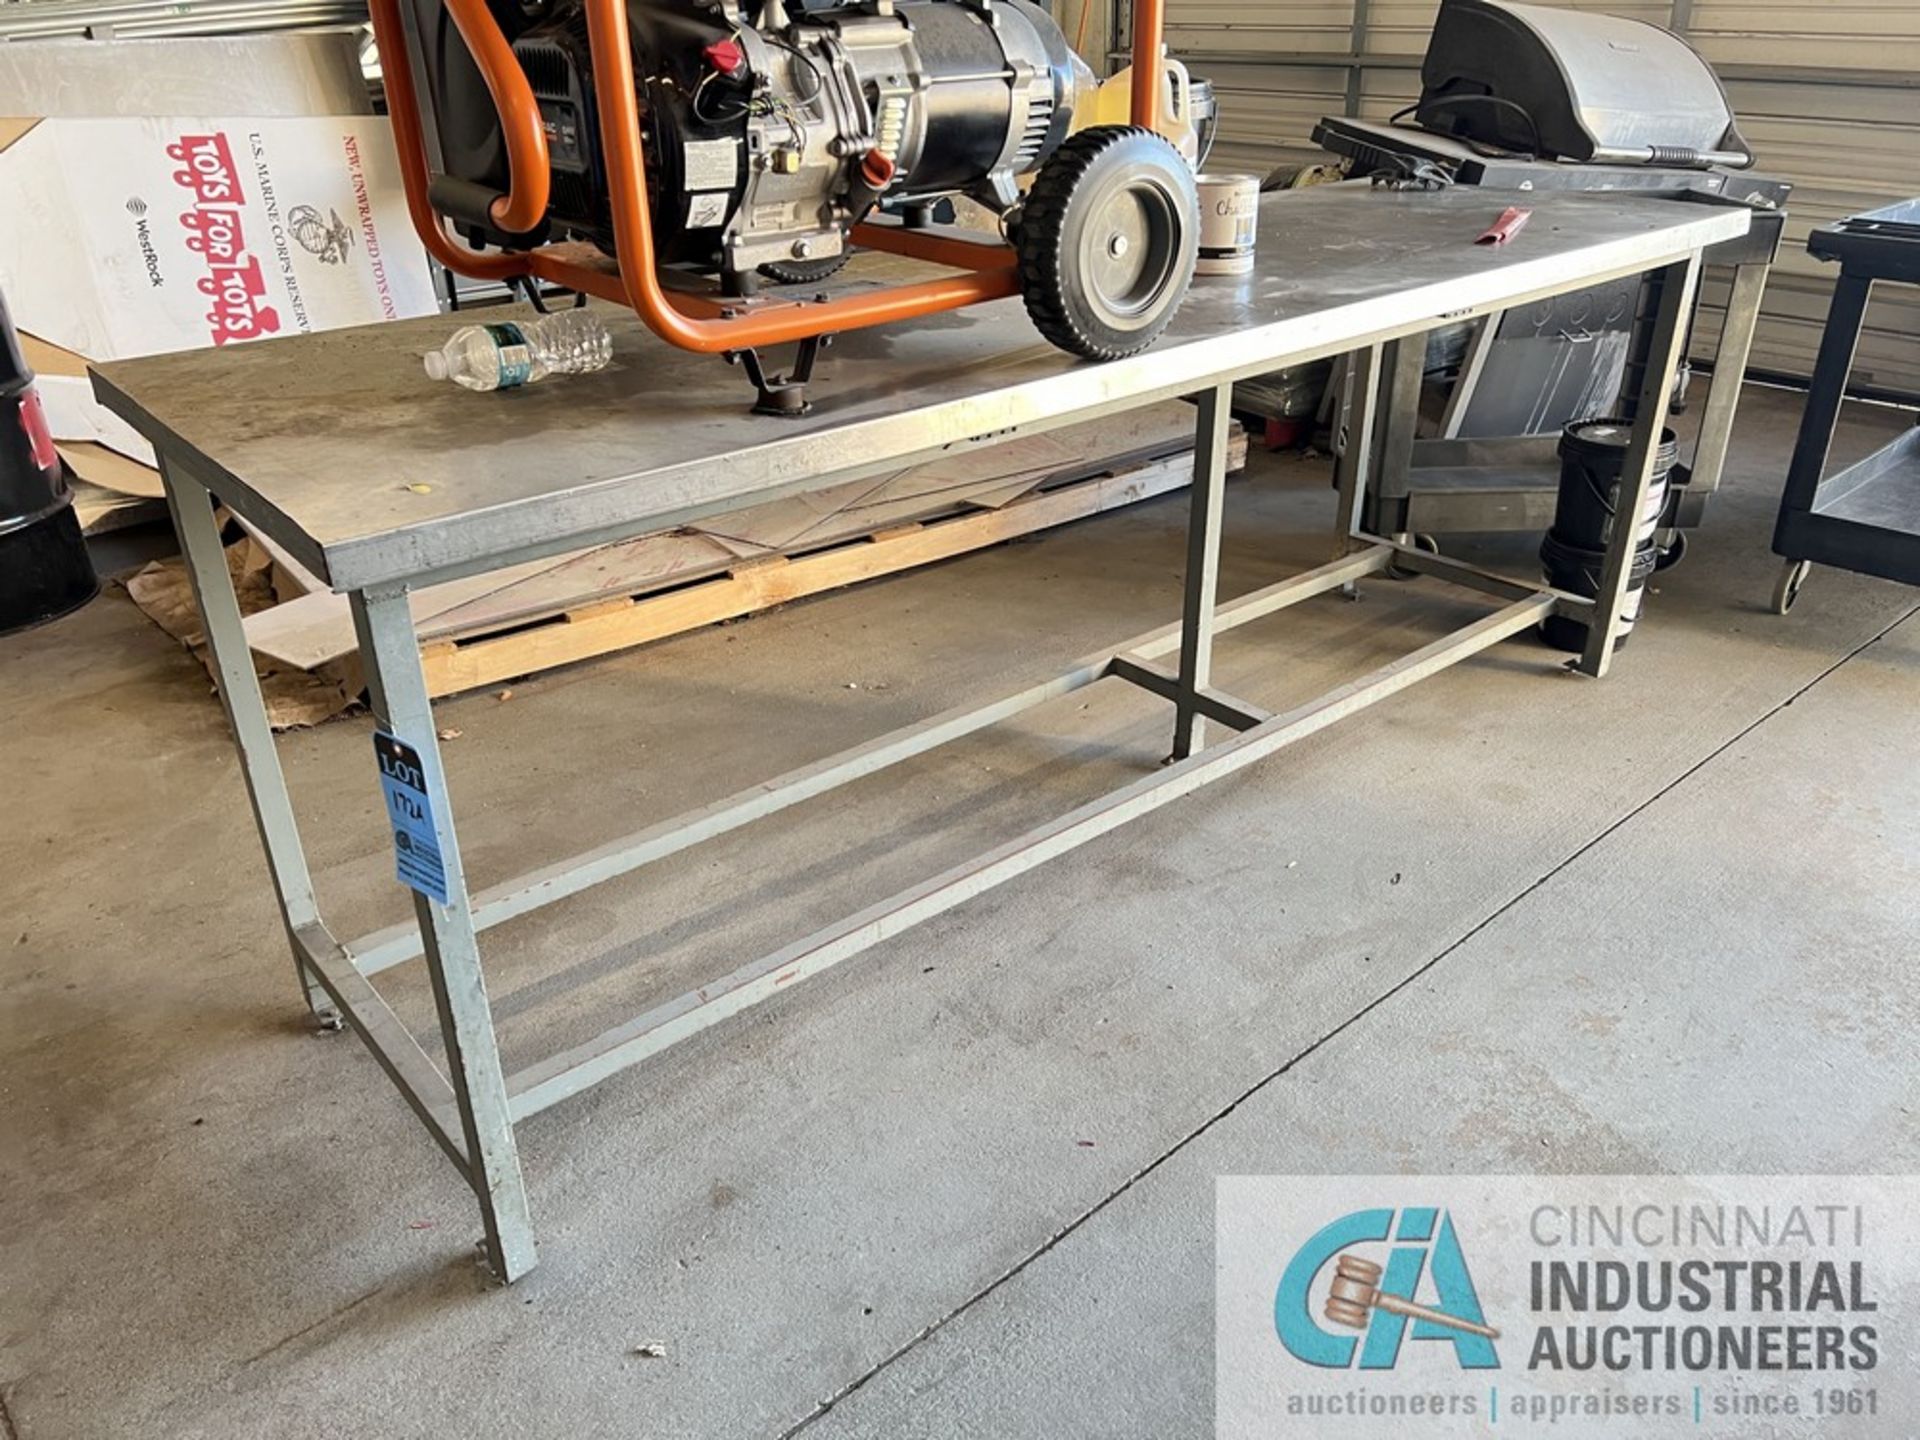 96" X 30" STEEL FRAME BENCHES (AIR COMPRESSOR ROOM)